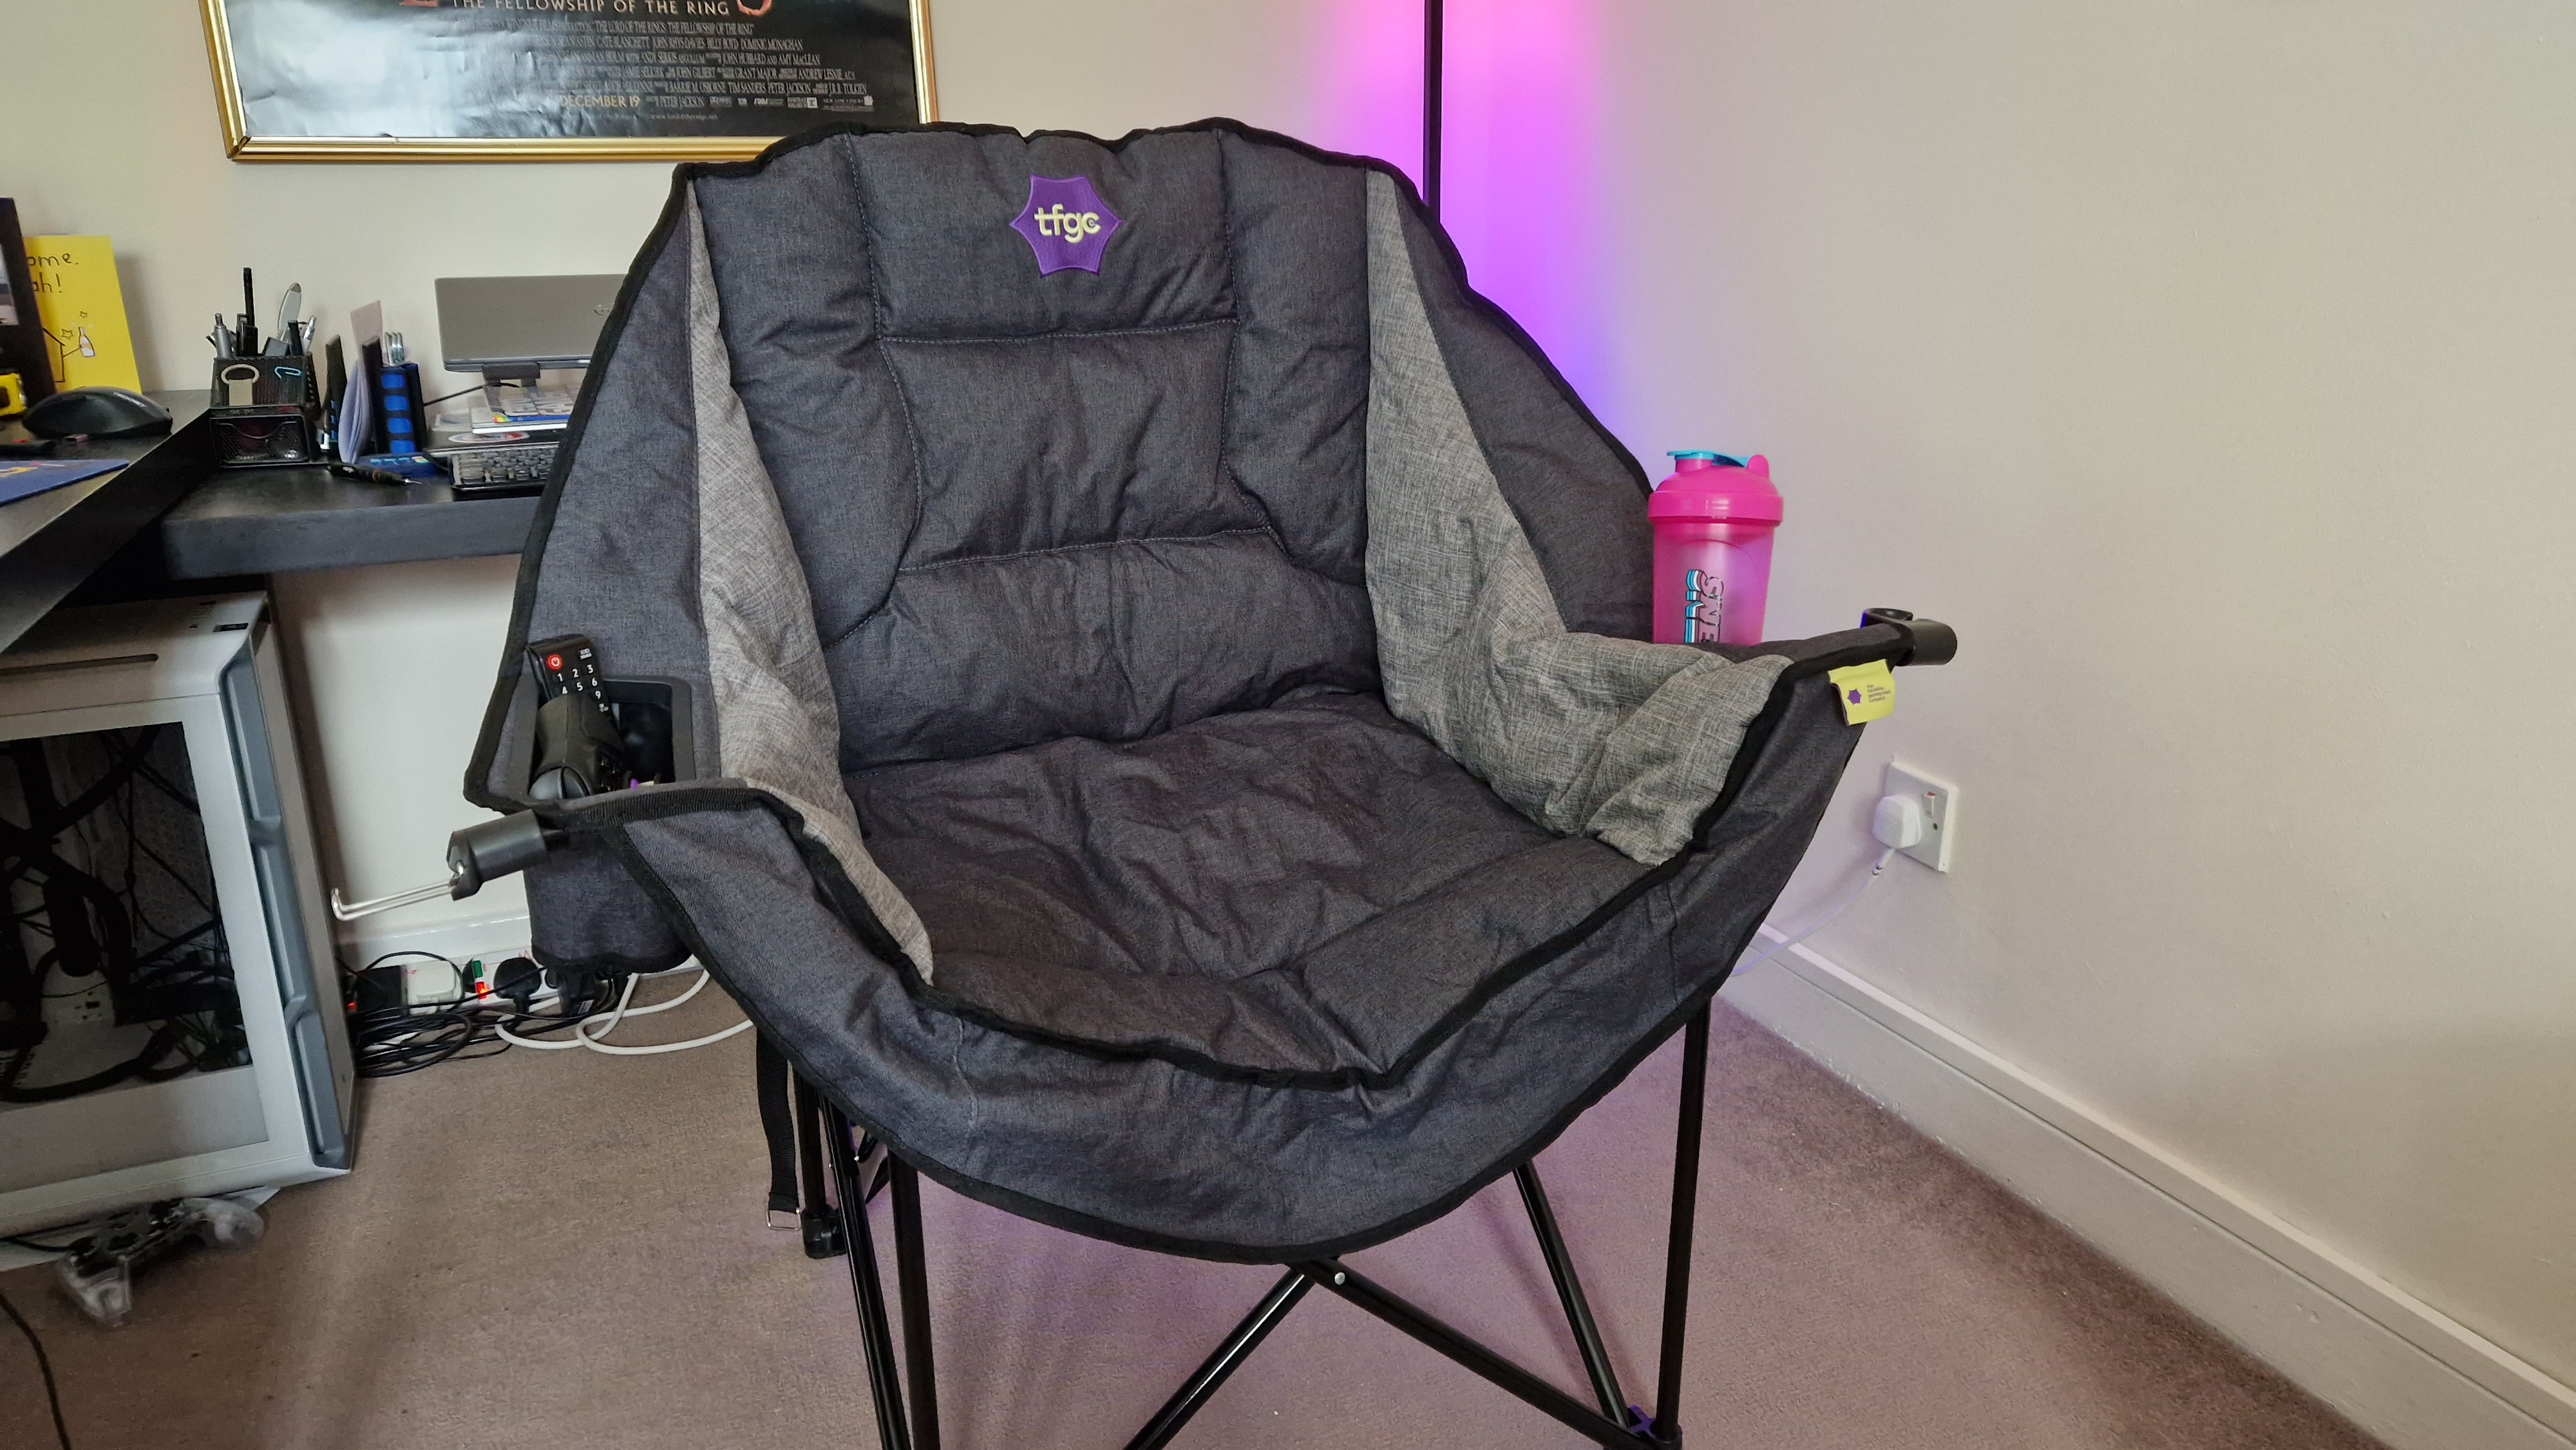 Gaming Chair Released Exclusively for Xbox Launch